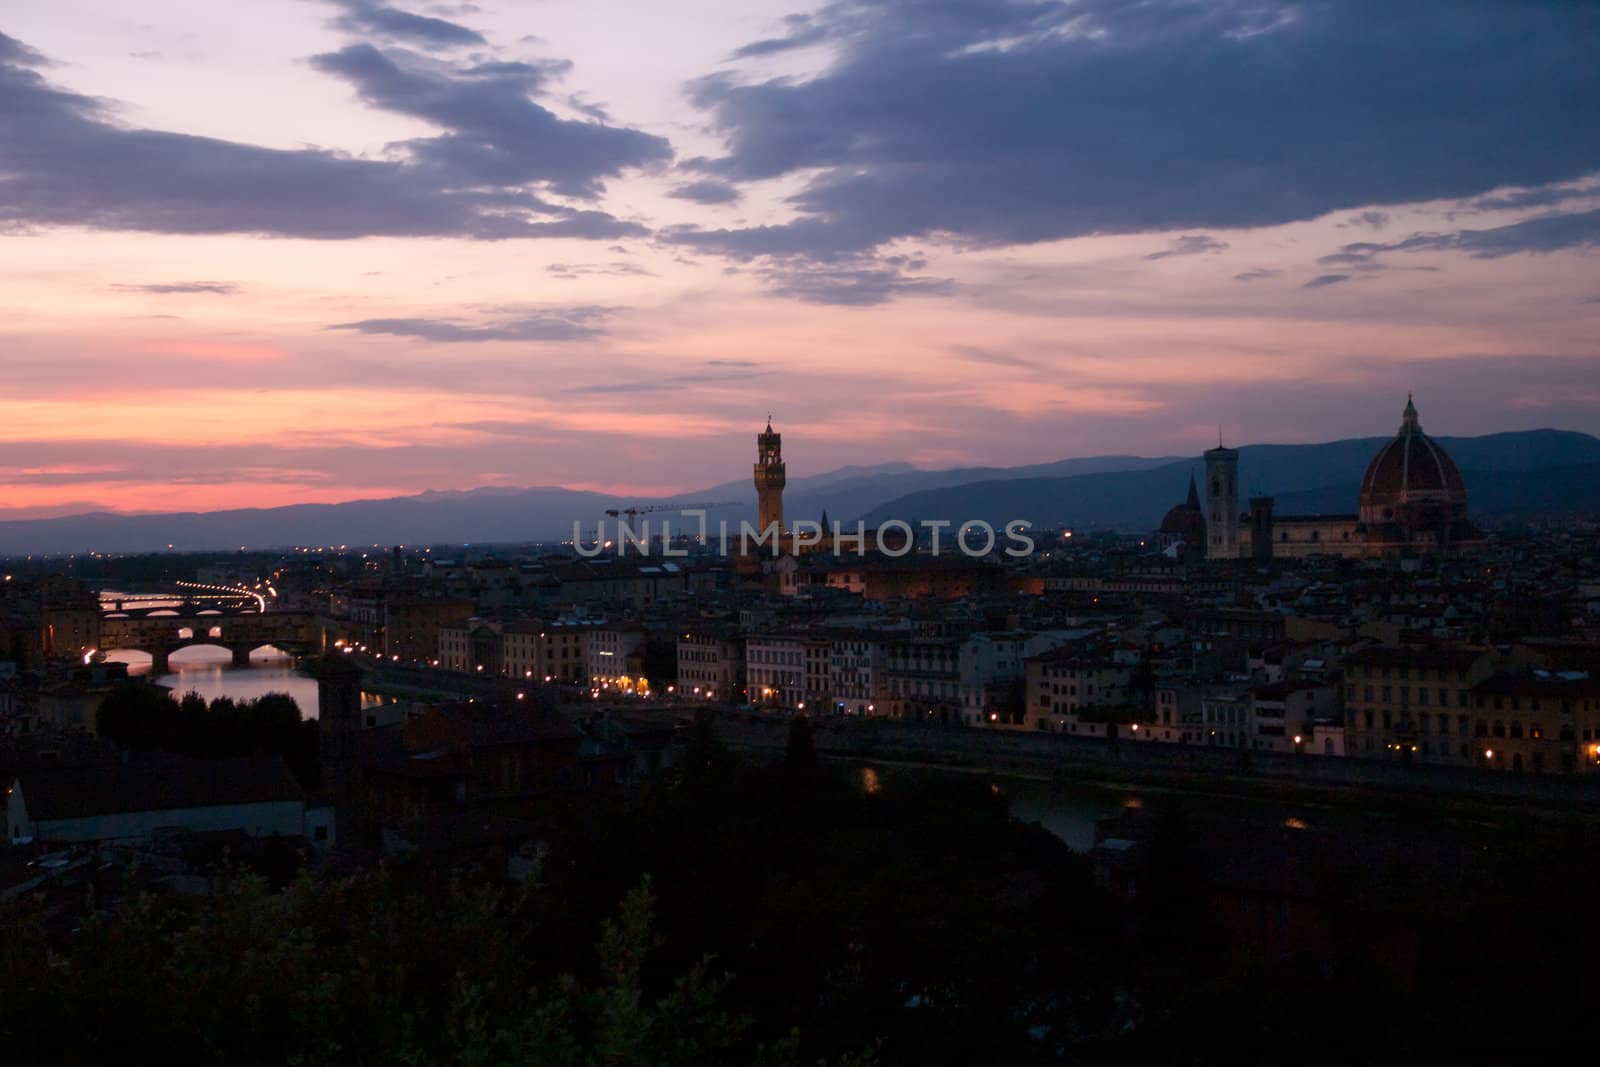 Florence is the capital city of the Italian region of Tuscany and of the province of Florence. It is the most populous city in Tuscany.